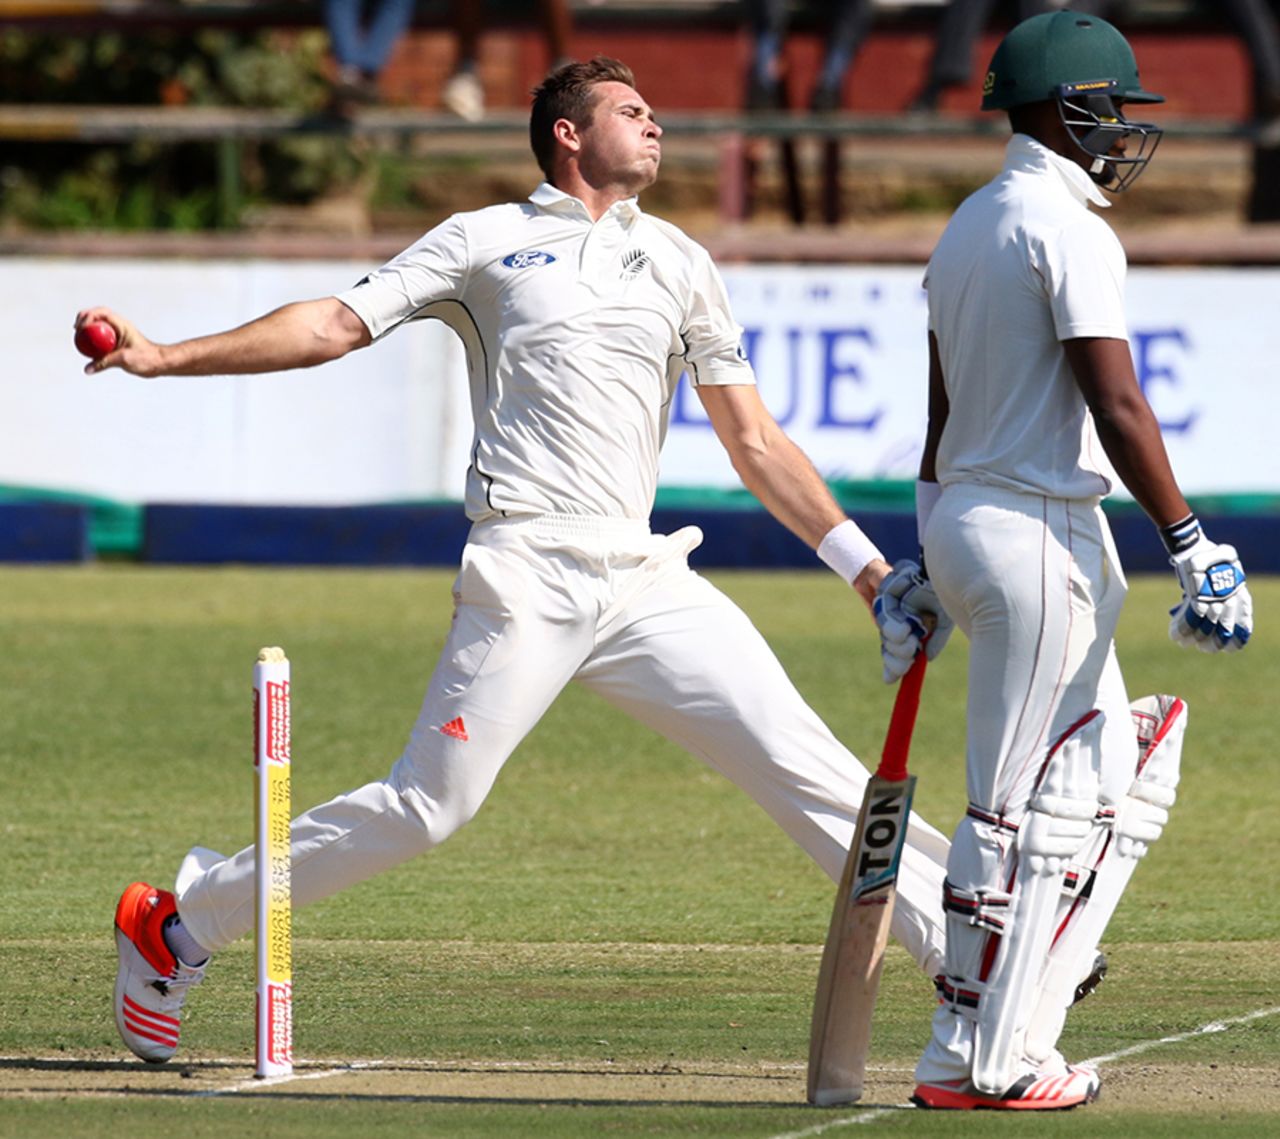 Tim Southee in his delivery stride, Zimbabwe v New Zealand, 1st Test, Bulawayo, 1st day, July 28, 2016